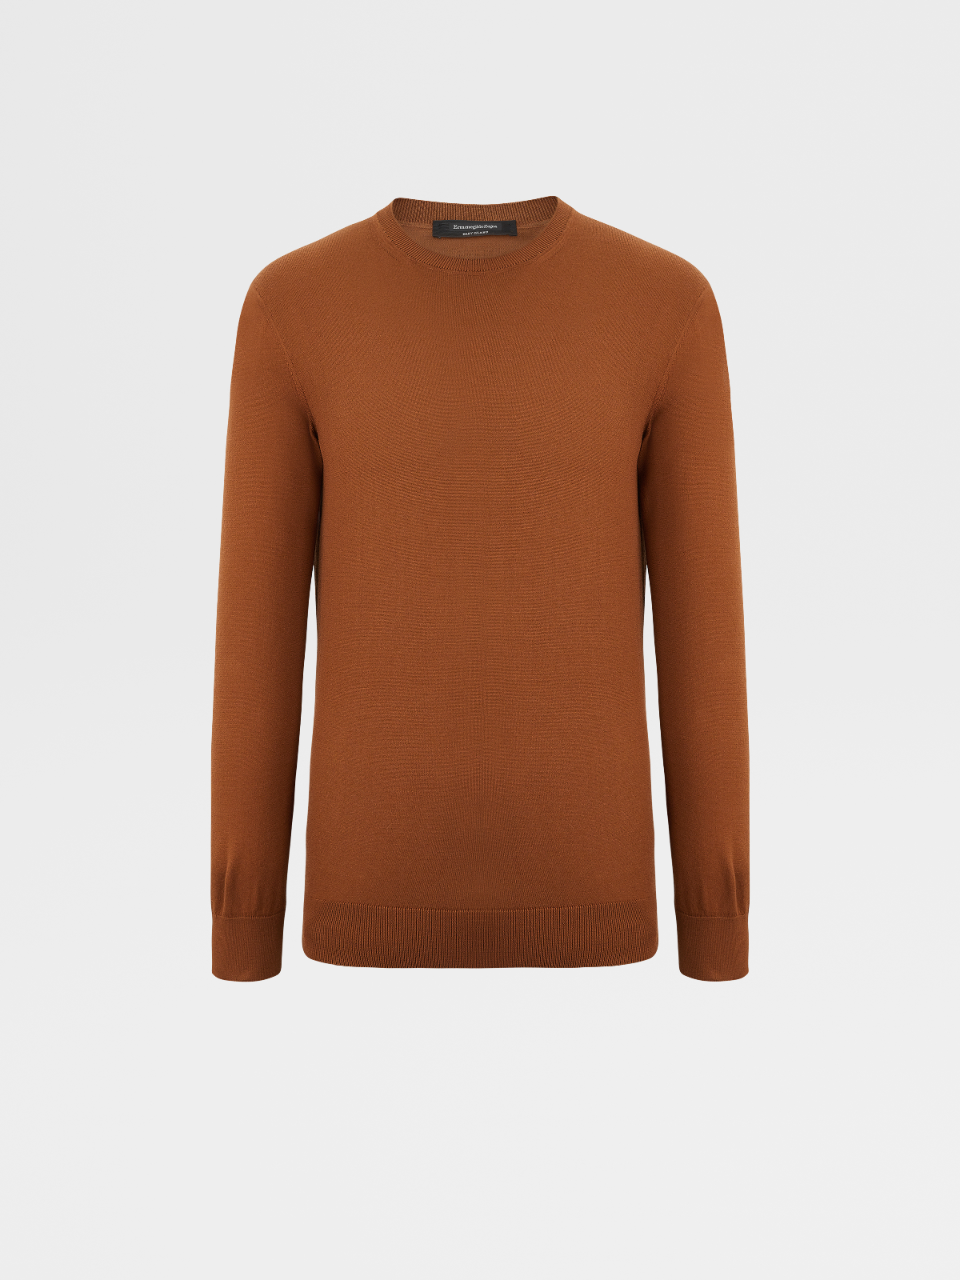 Vicuna Baby Island Cotton and Cashmere Knit Crewneck